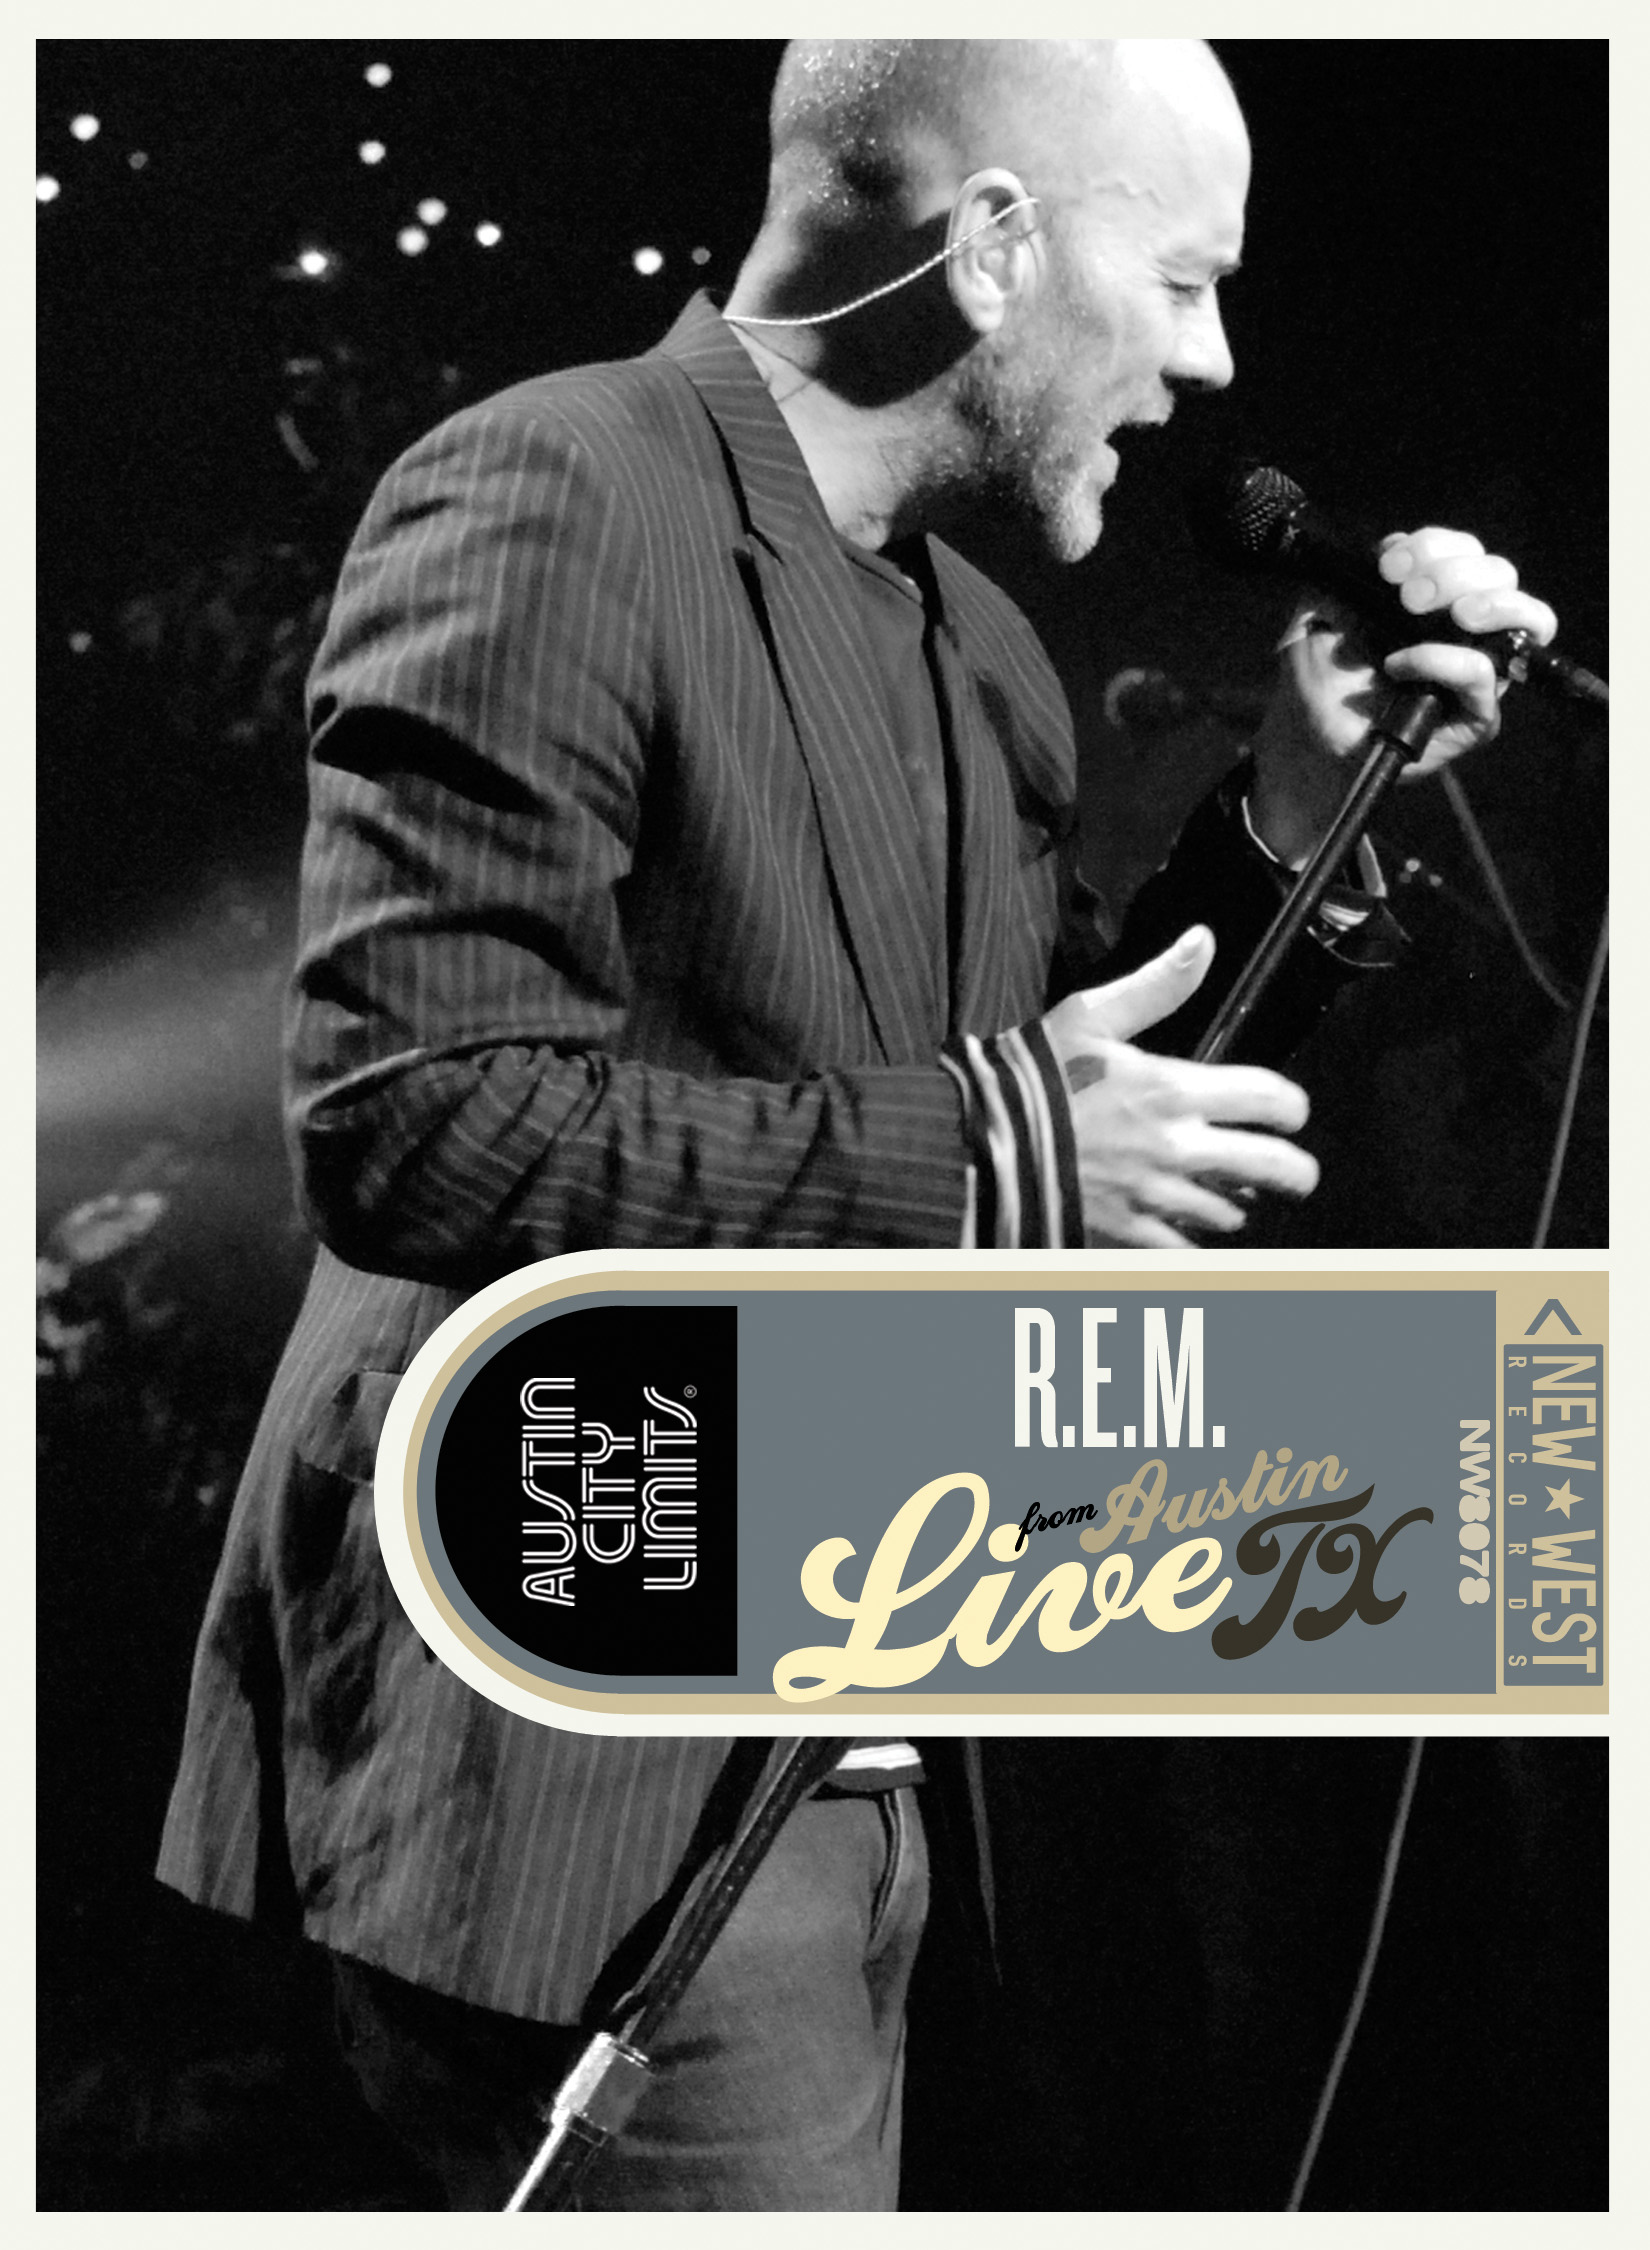 R.E.M. to release ‘Live From Austin, TX’ DVD with complete ‘Austin City Limits’ show